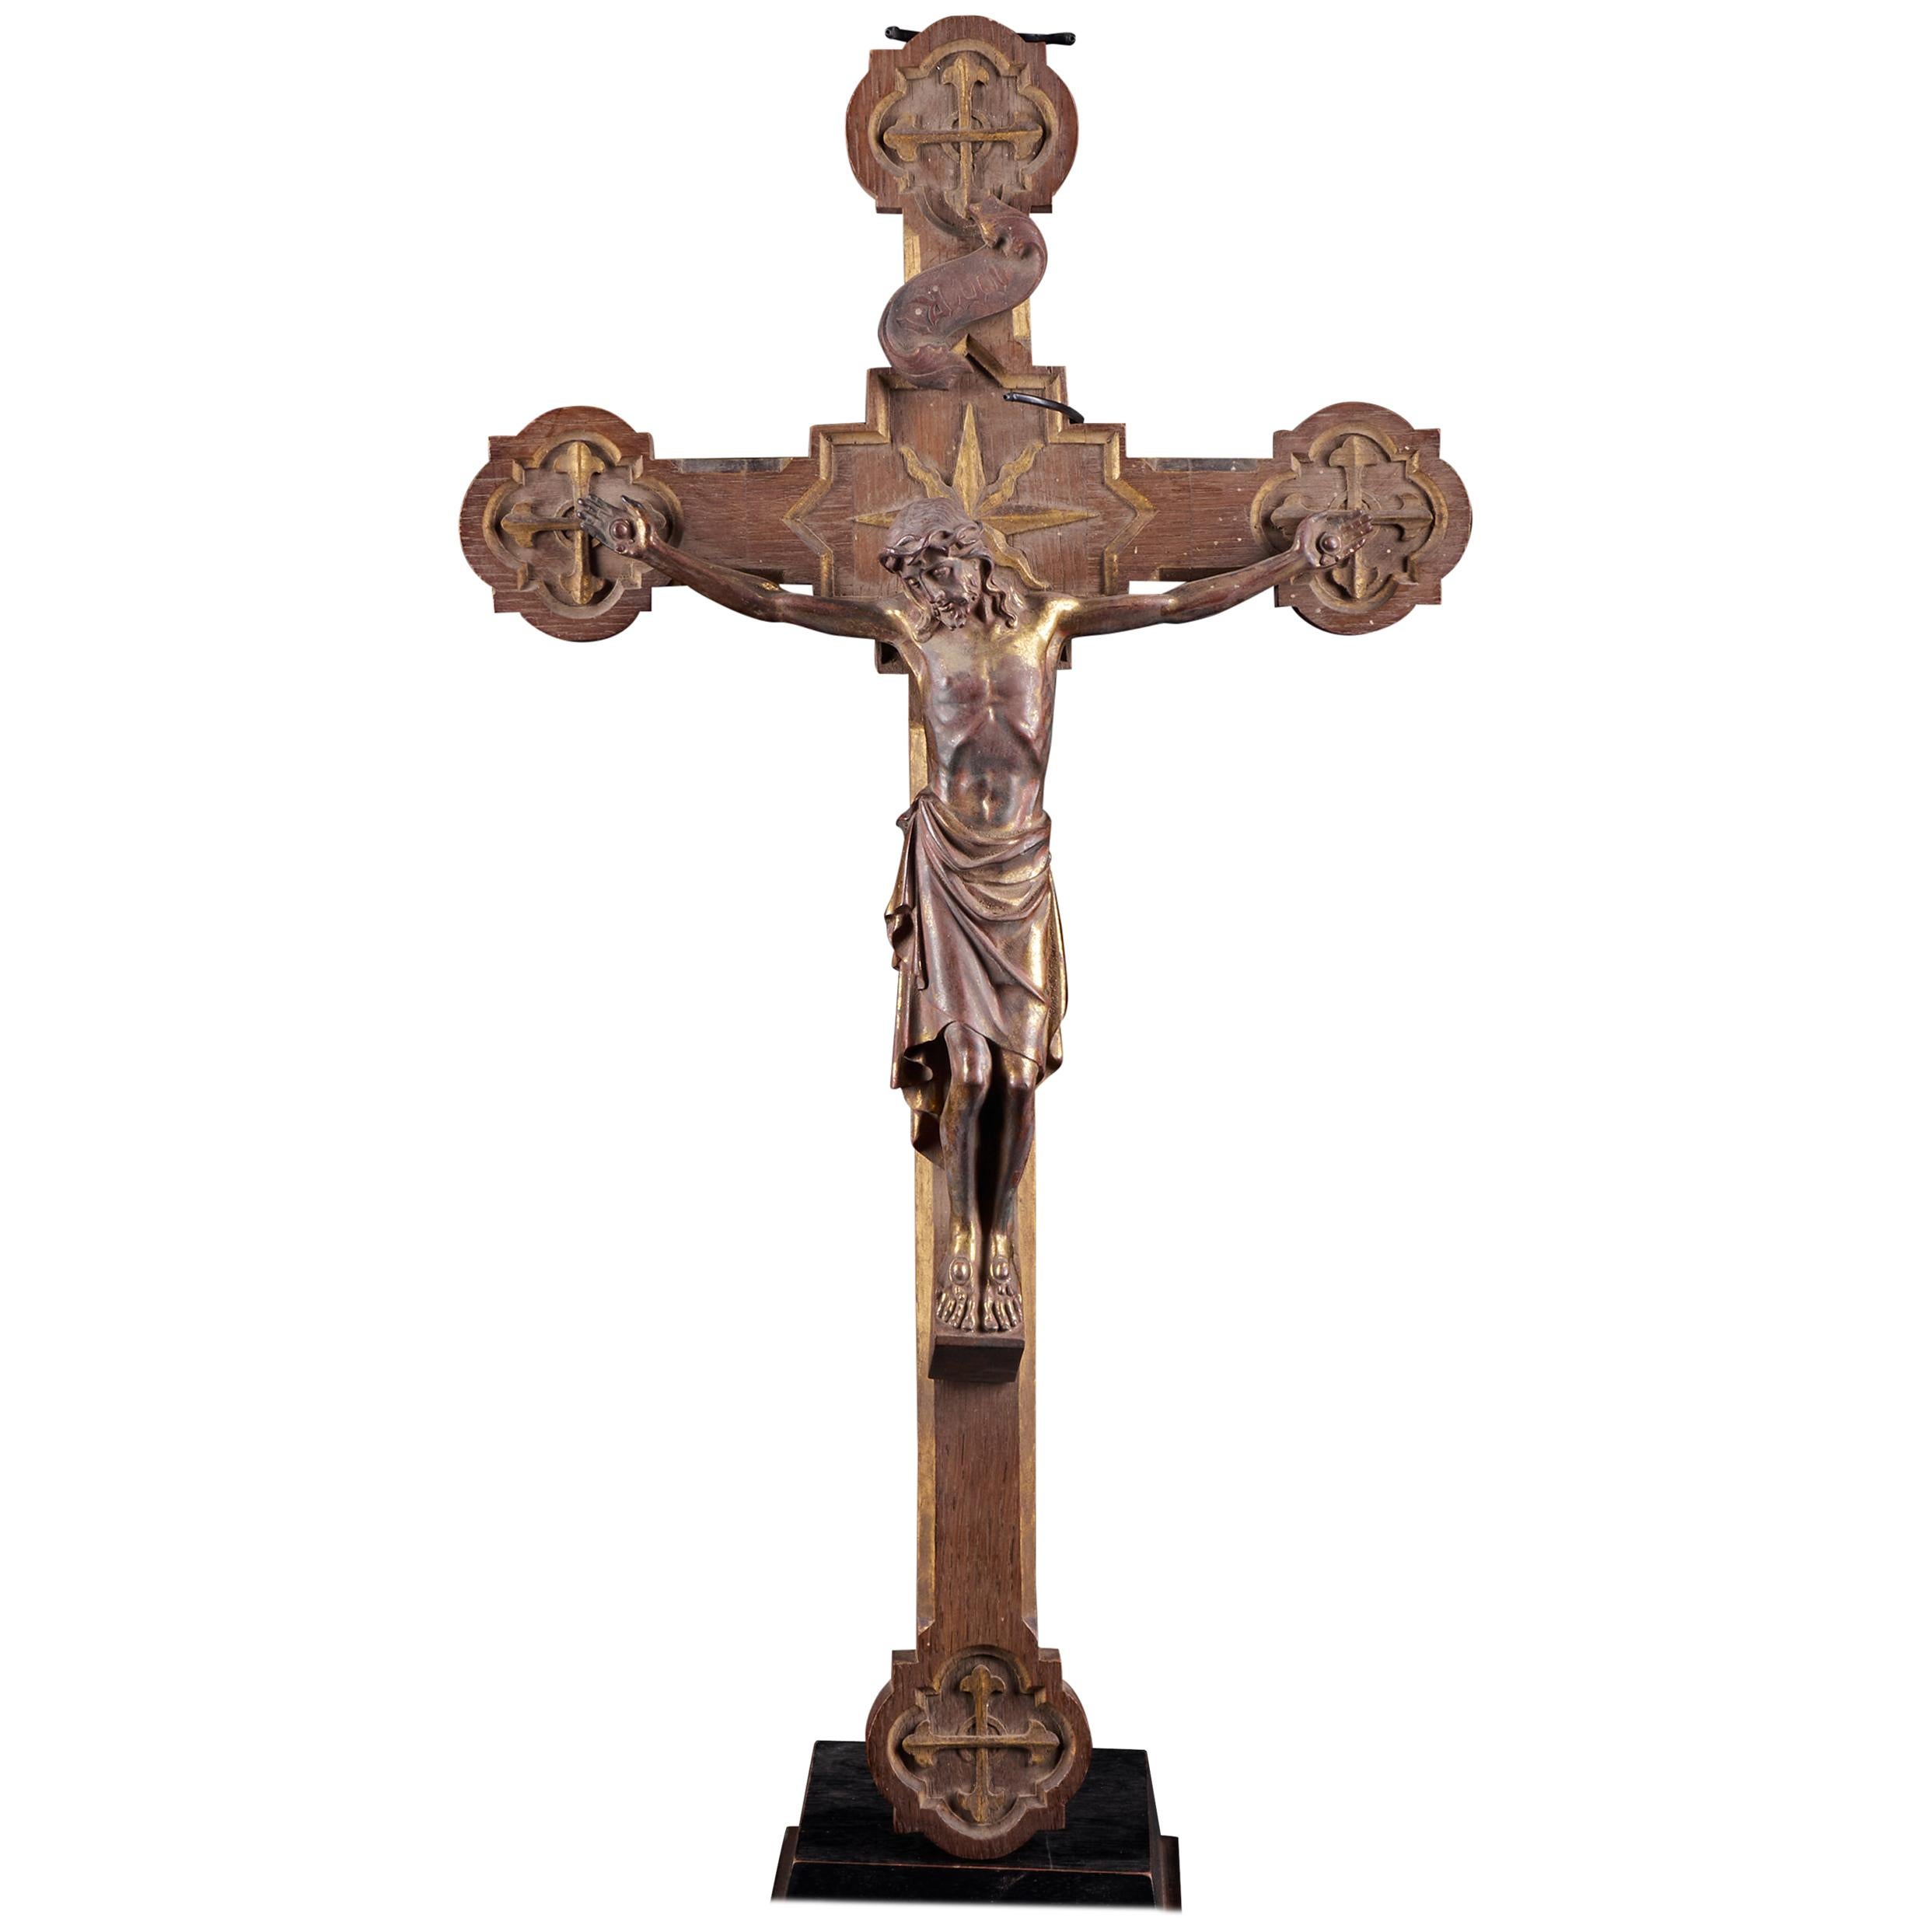 Rare and Remarkable Corpus Christi on a Decorated Wooden Cross